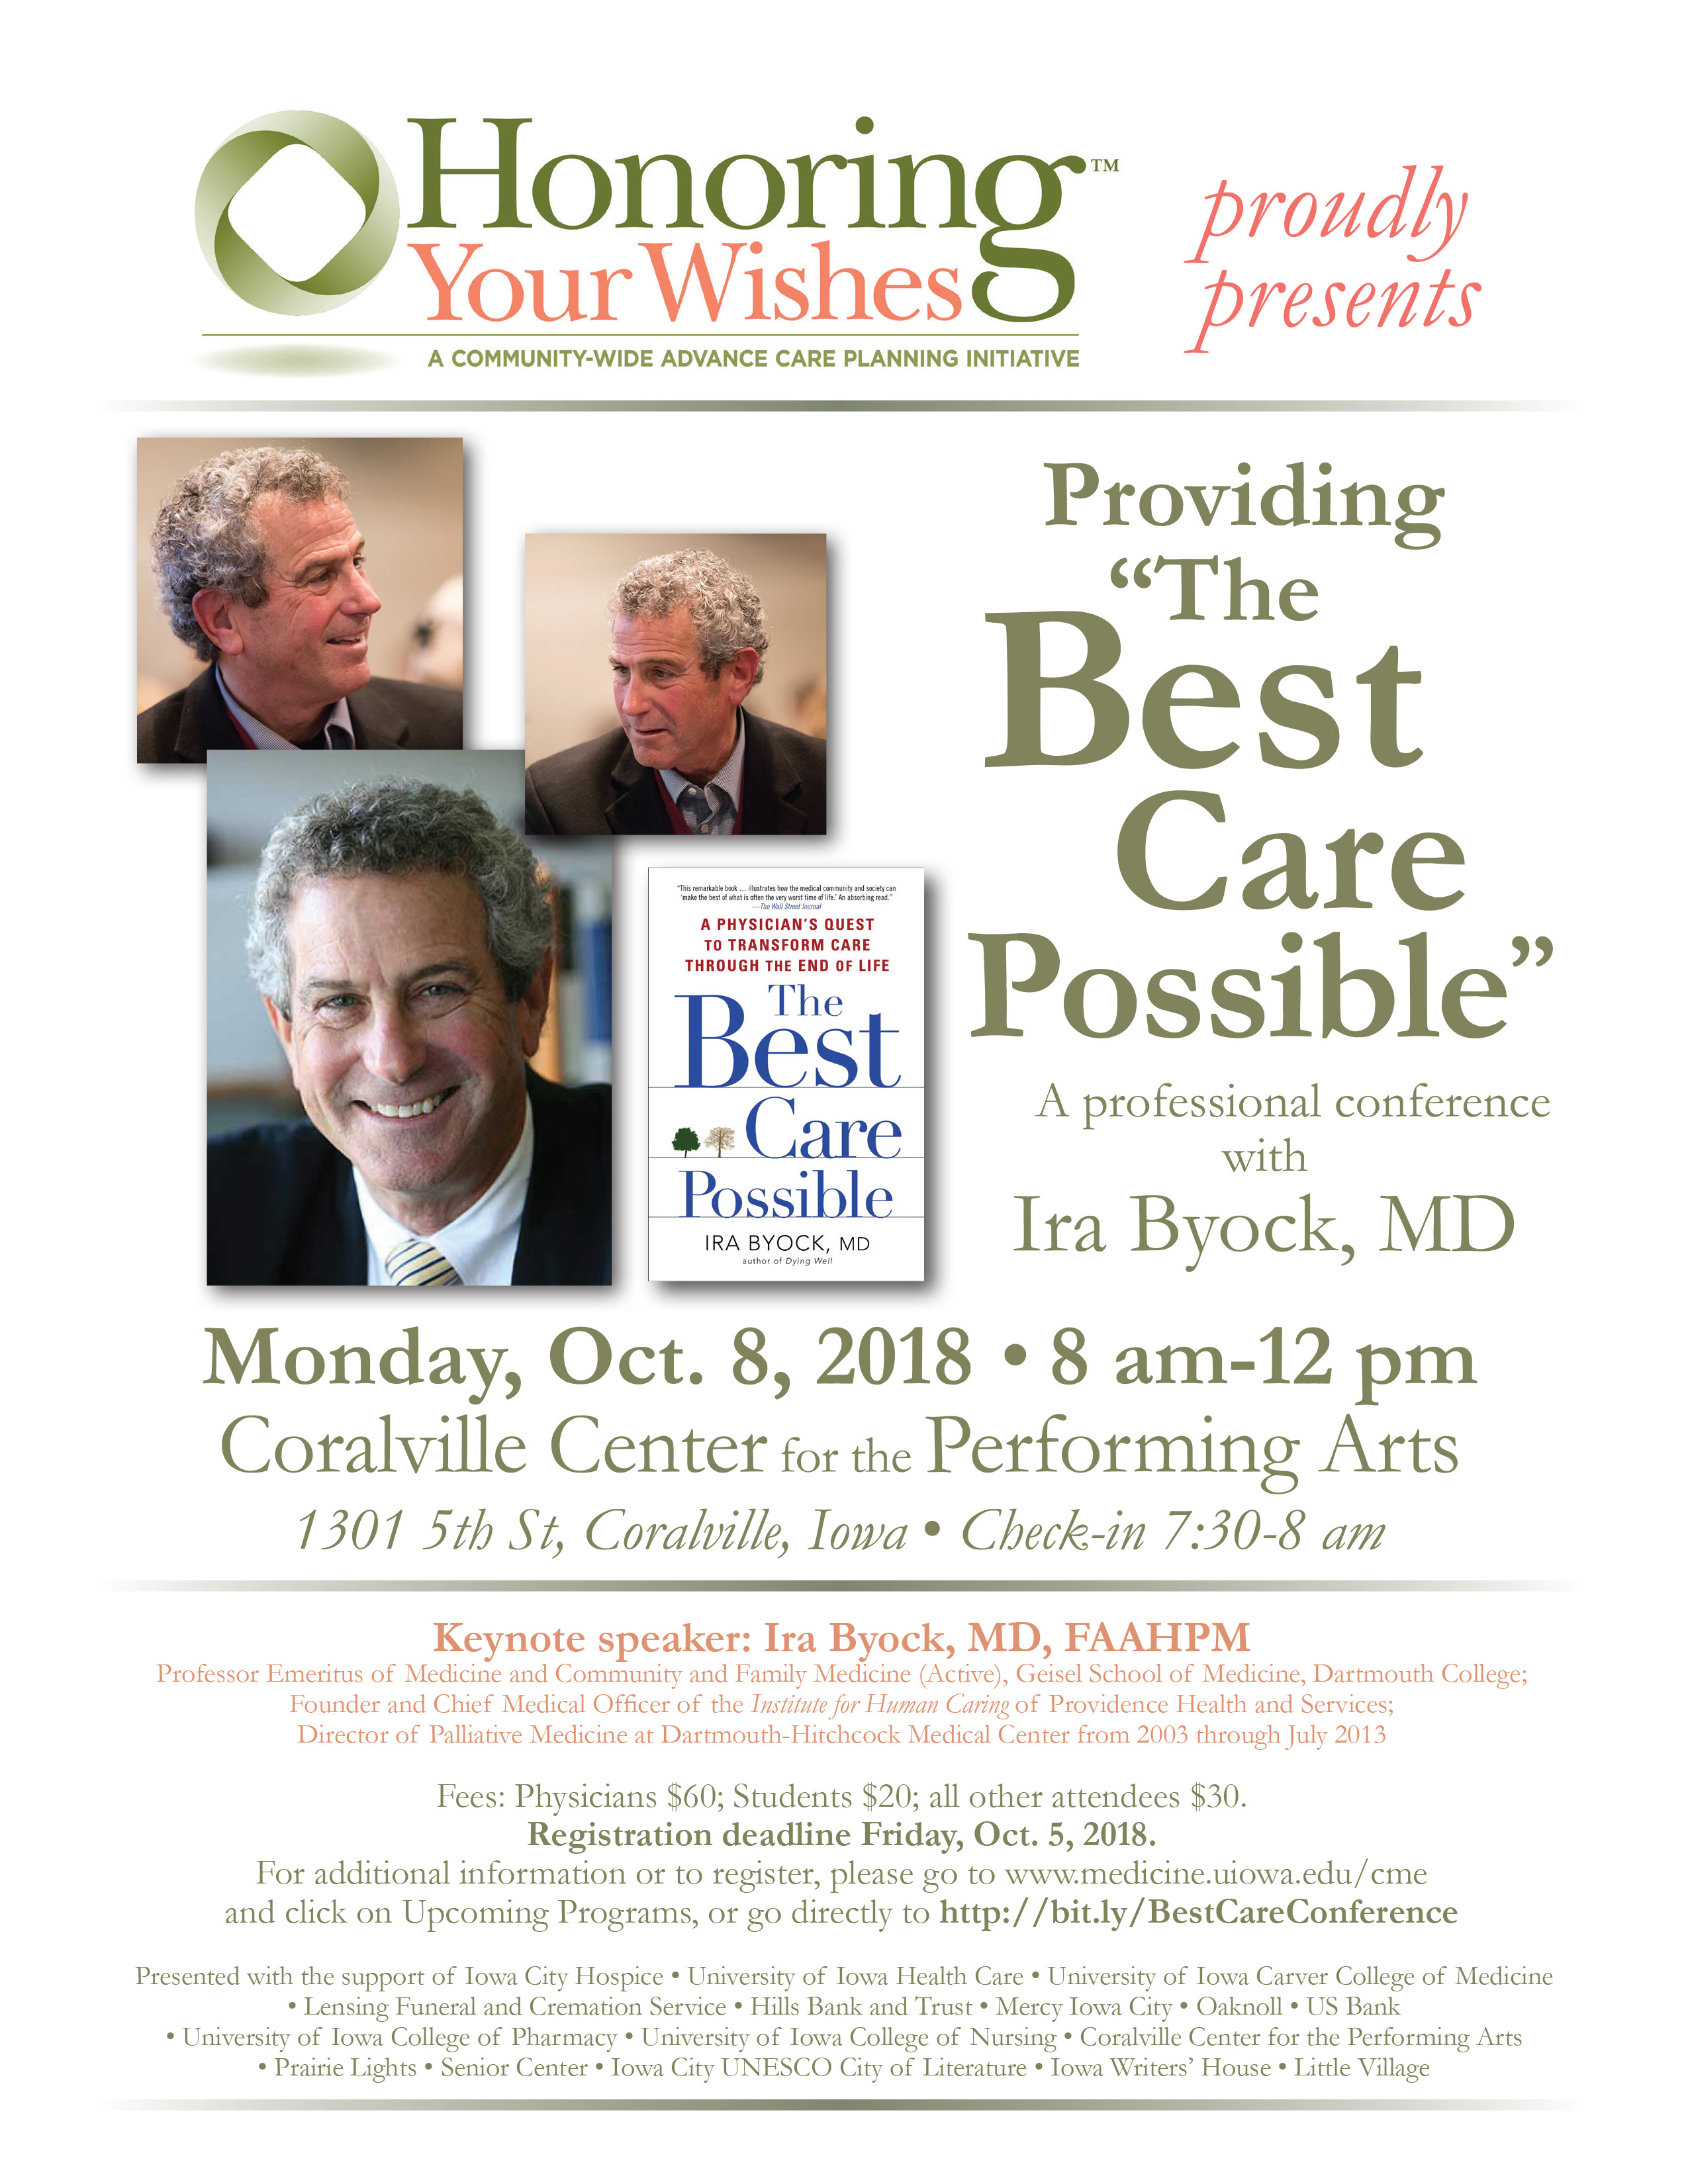 Providing "The Best Care Possible," a professional conference with Ira Byock, MD promotional image